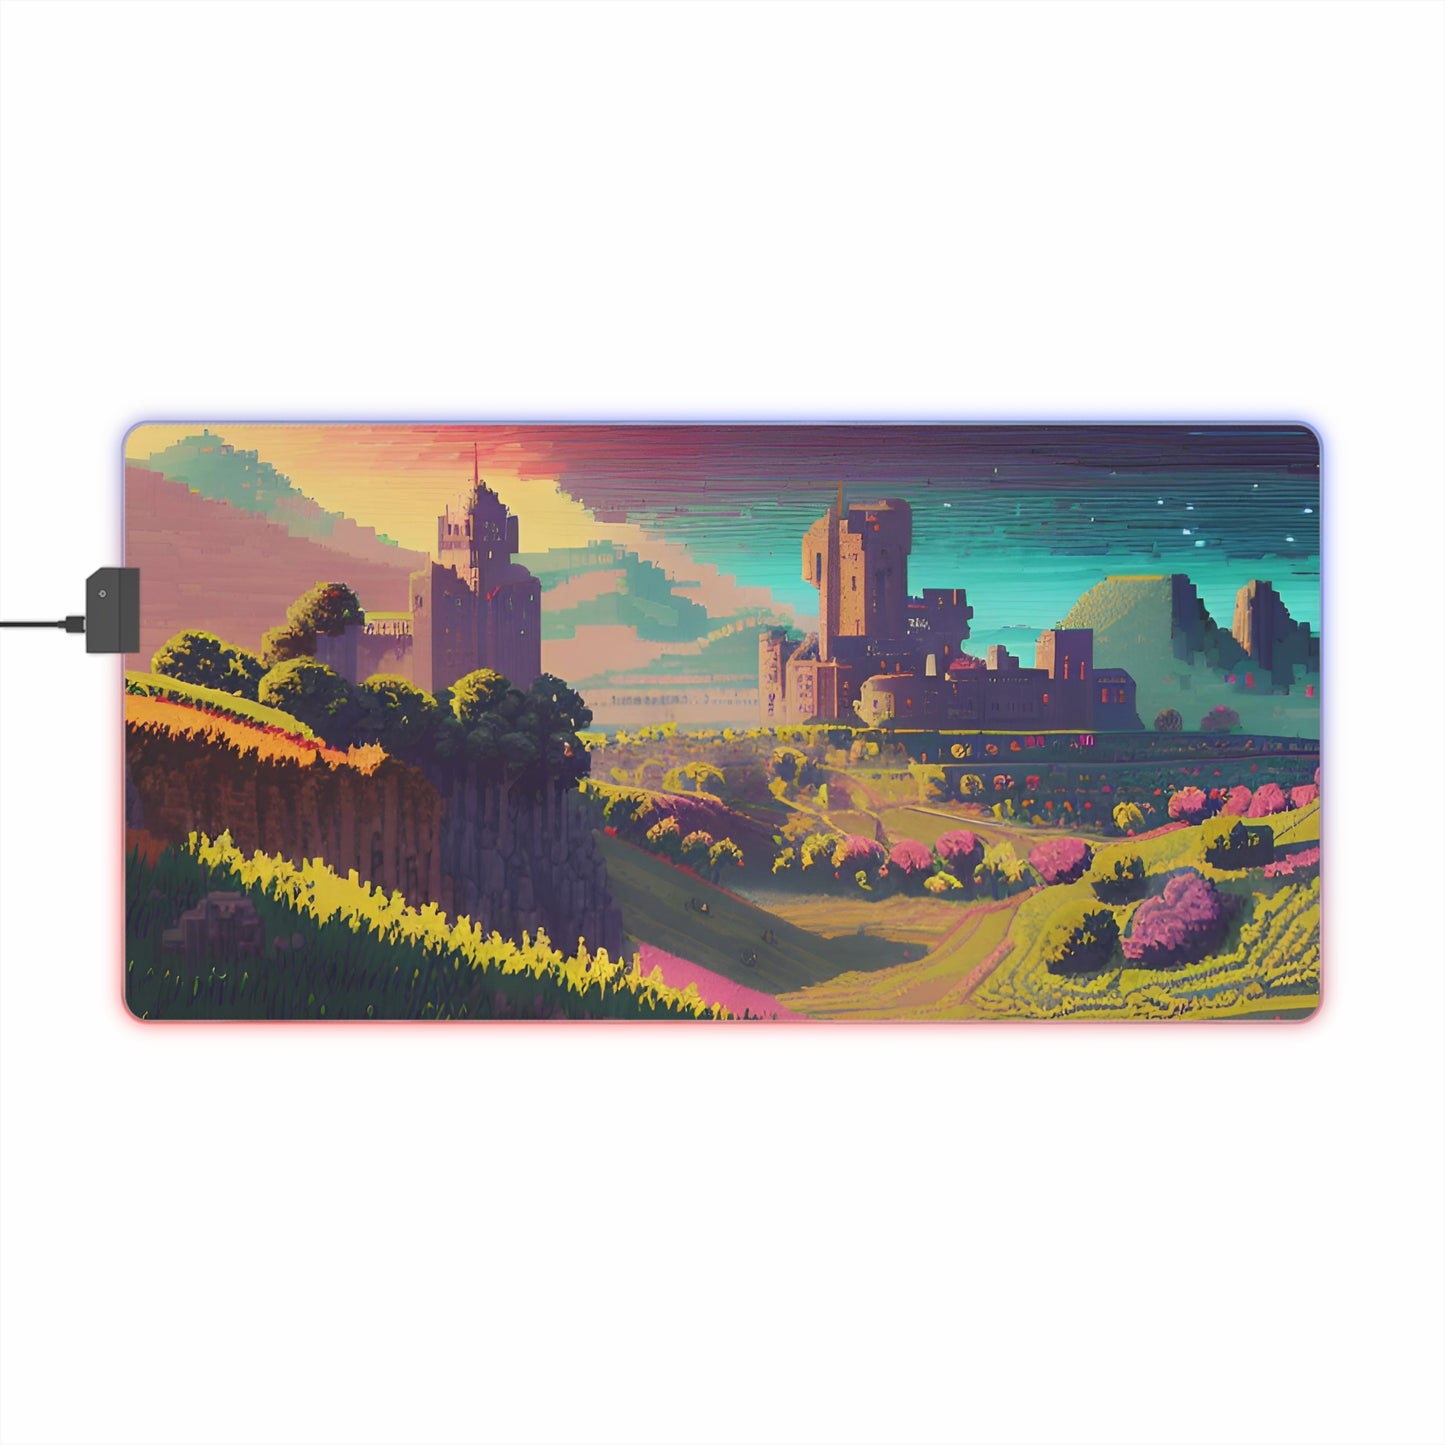 Pixel castles LED Gaming Mouse Pad